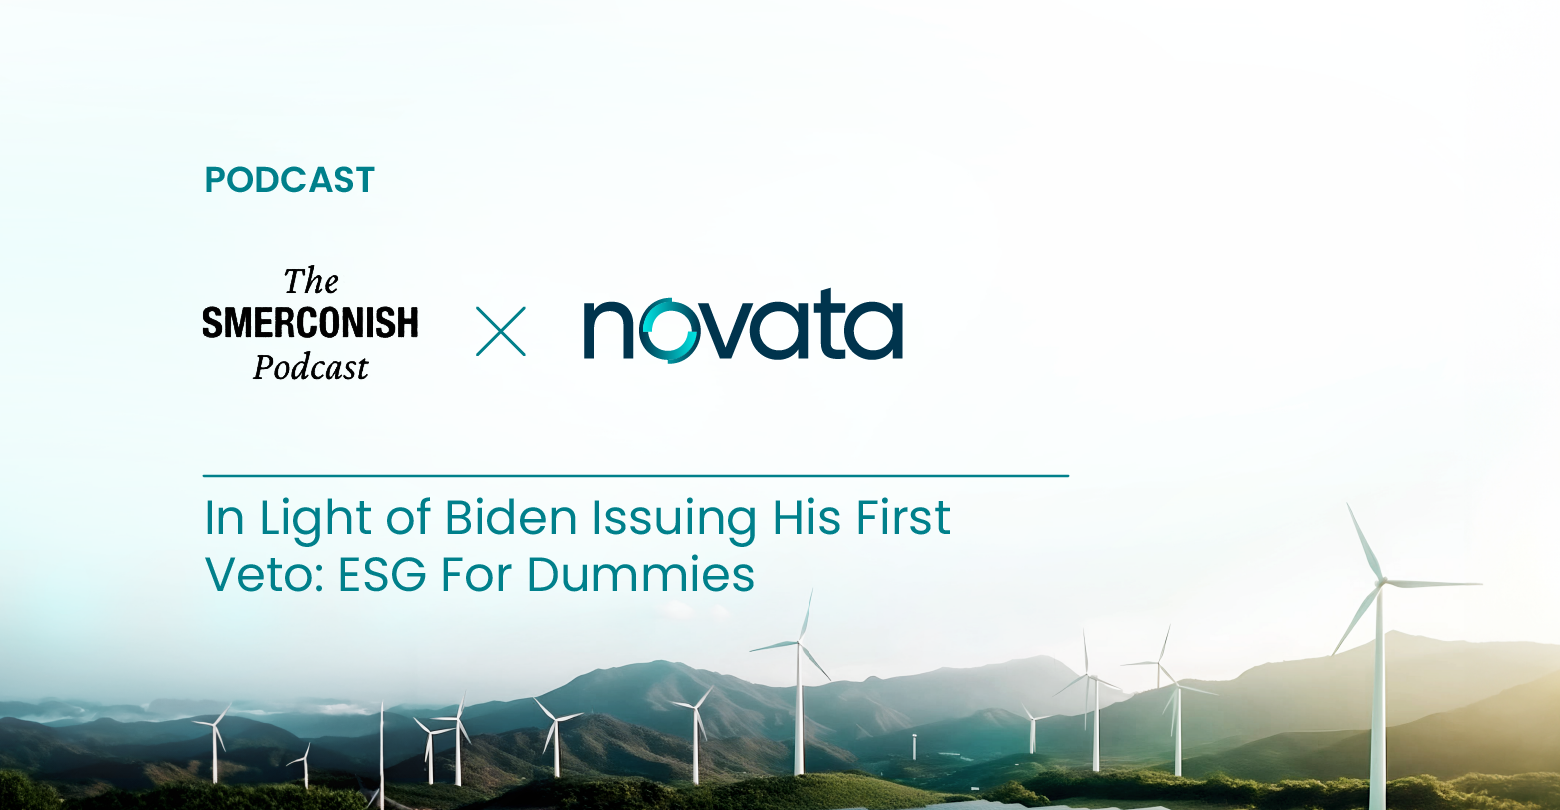 The Smerconish Podcast and Novata: In Light of Biden Issuing His First Veto: ESG for Dummies